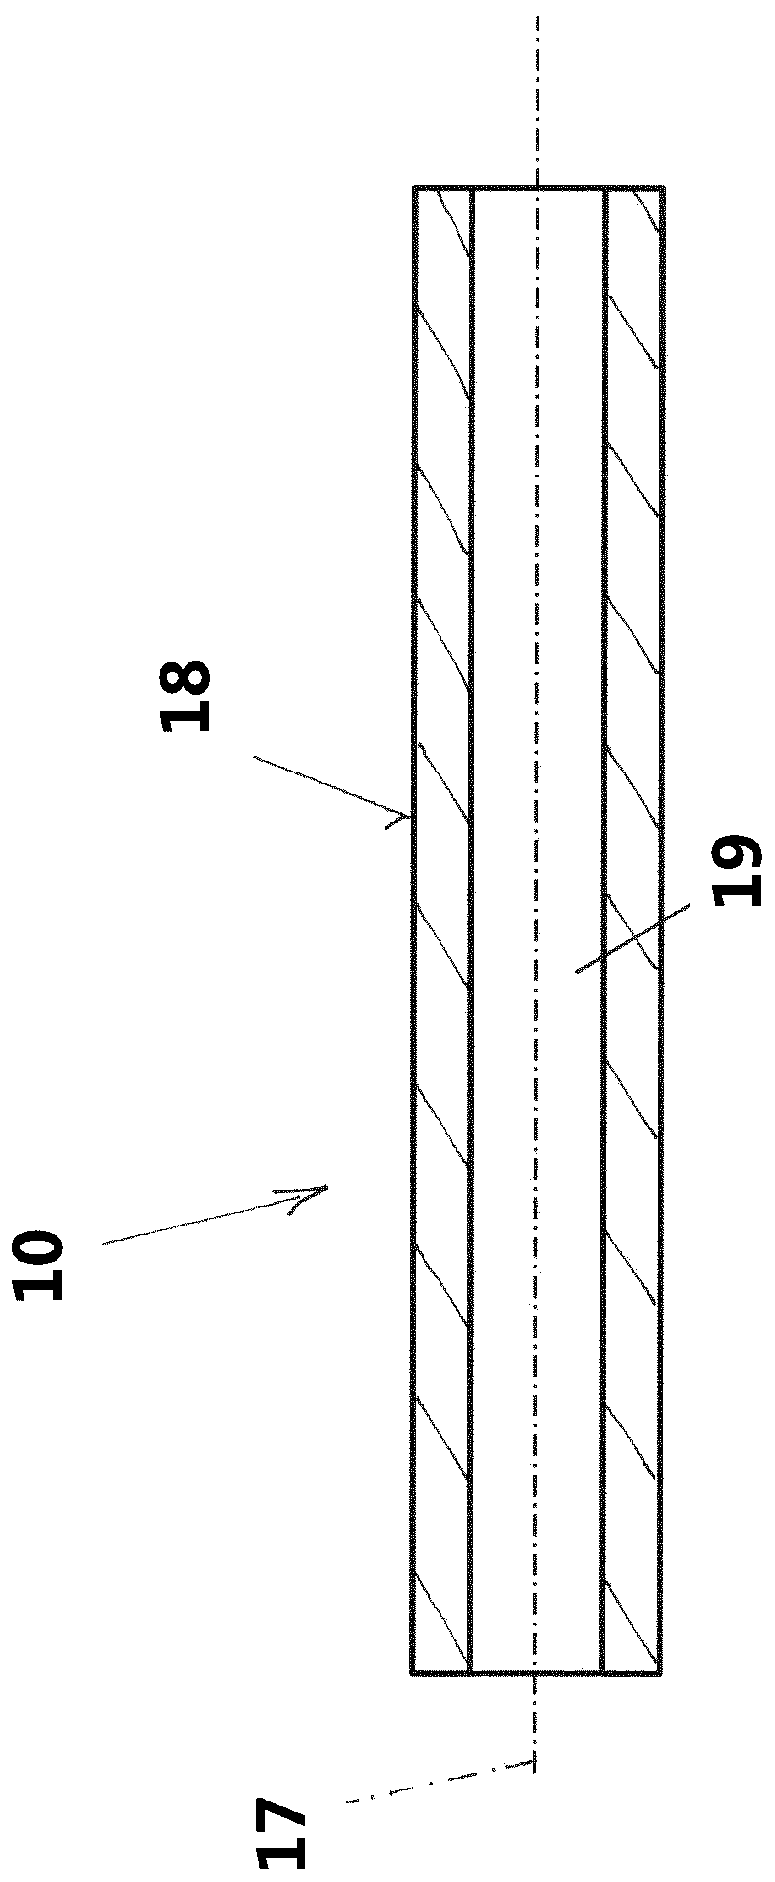 Method for producing camshaft assembly